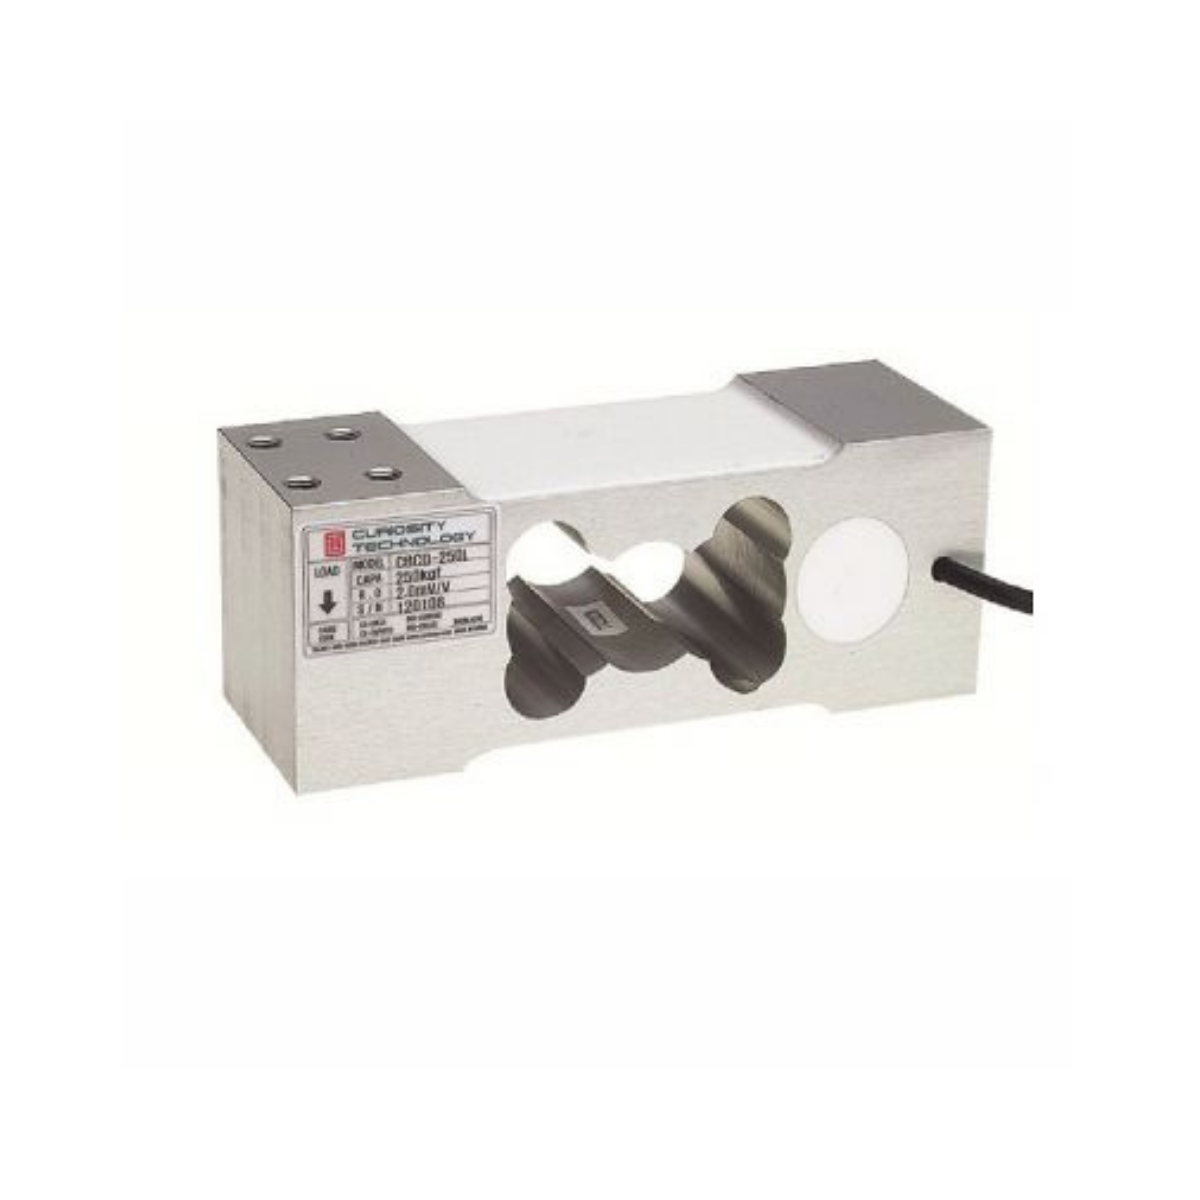 Curiotec CBCD-250L Single Point Load Cell